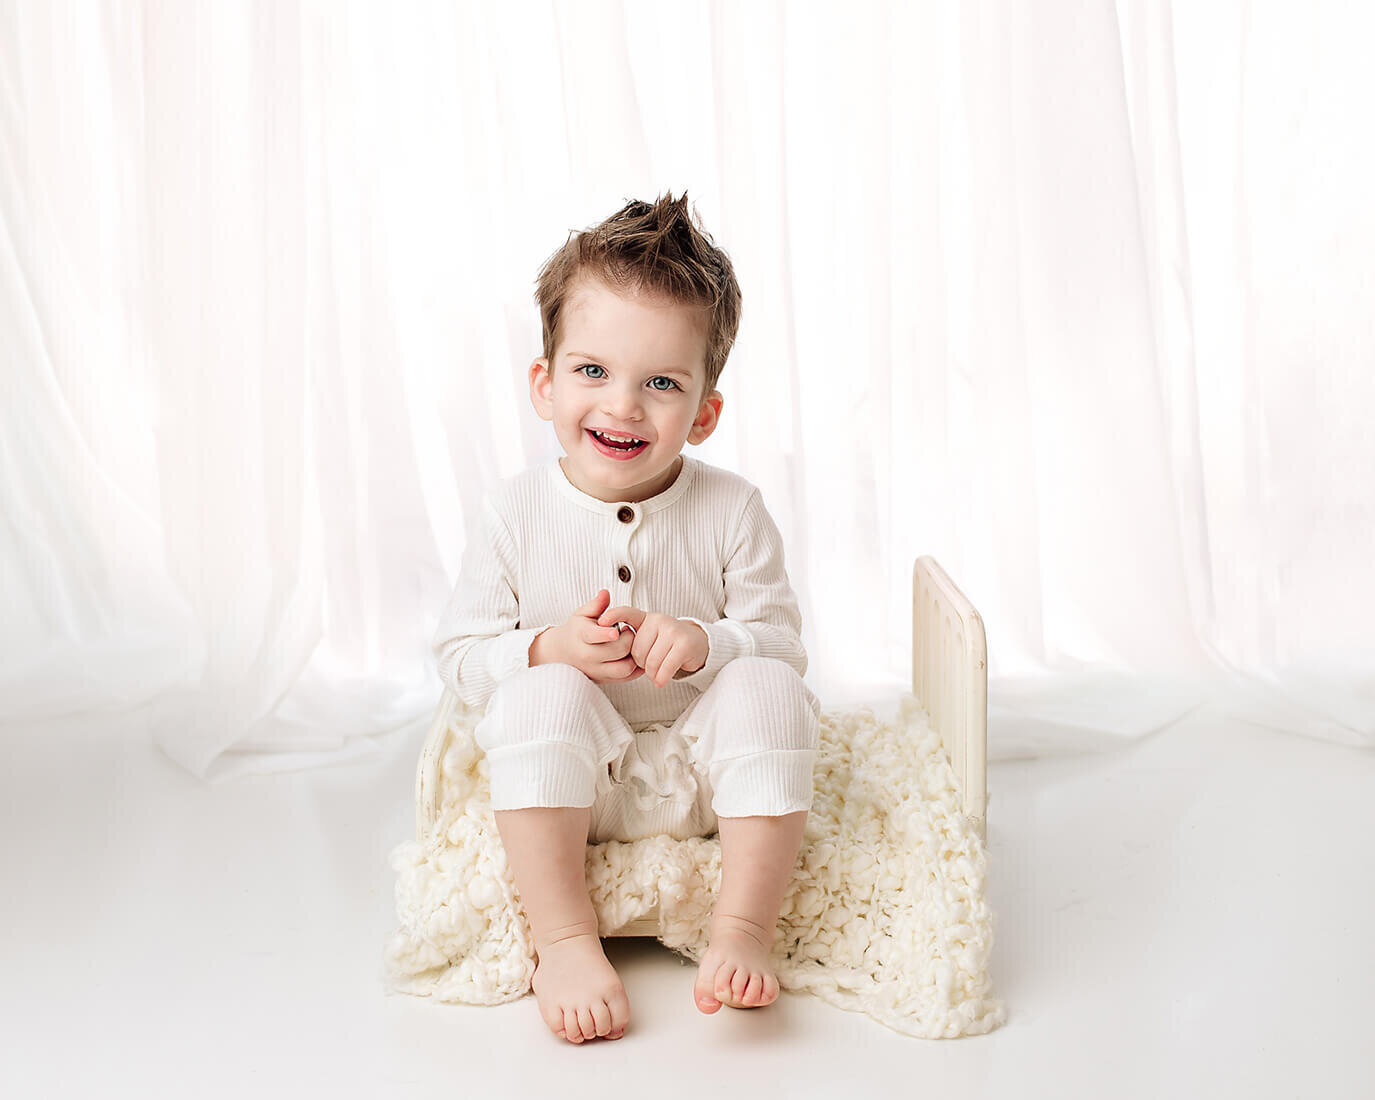 boy smiling on bed with white set up